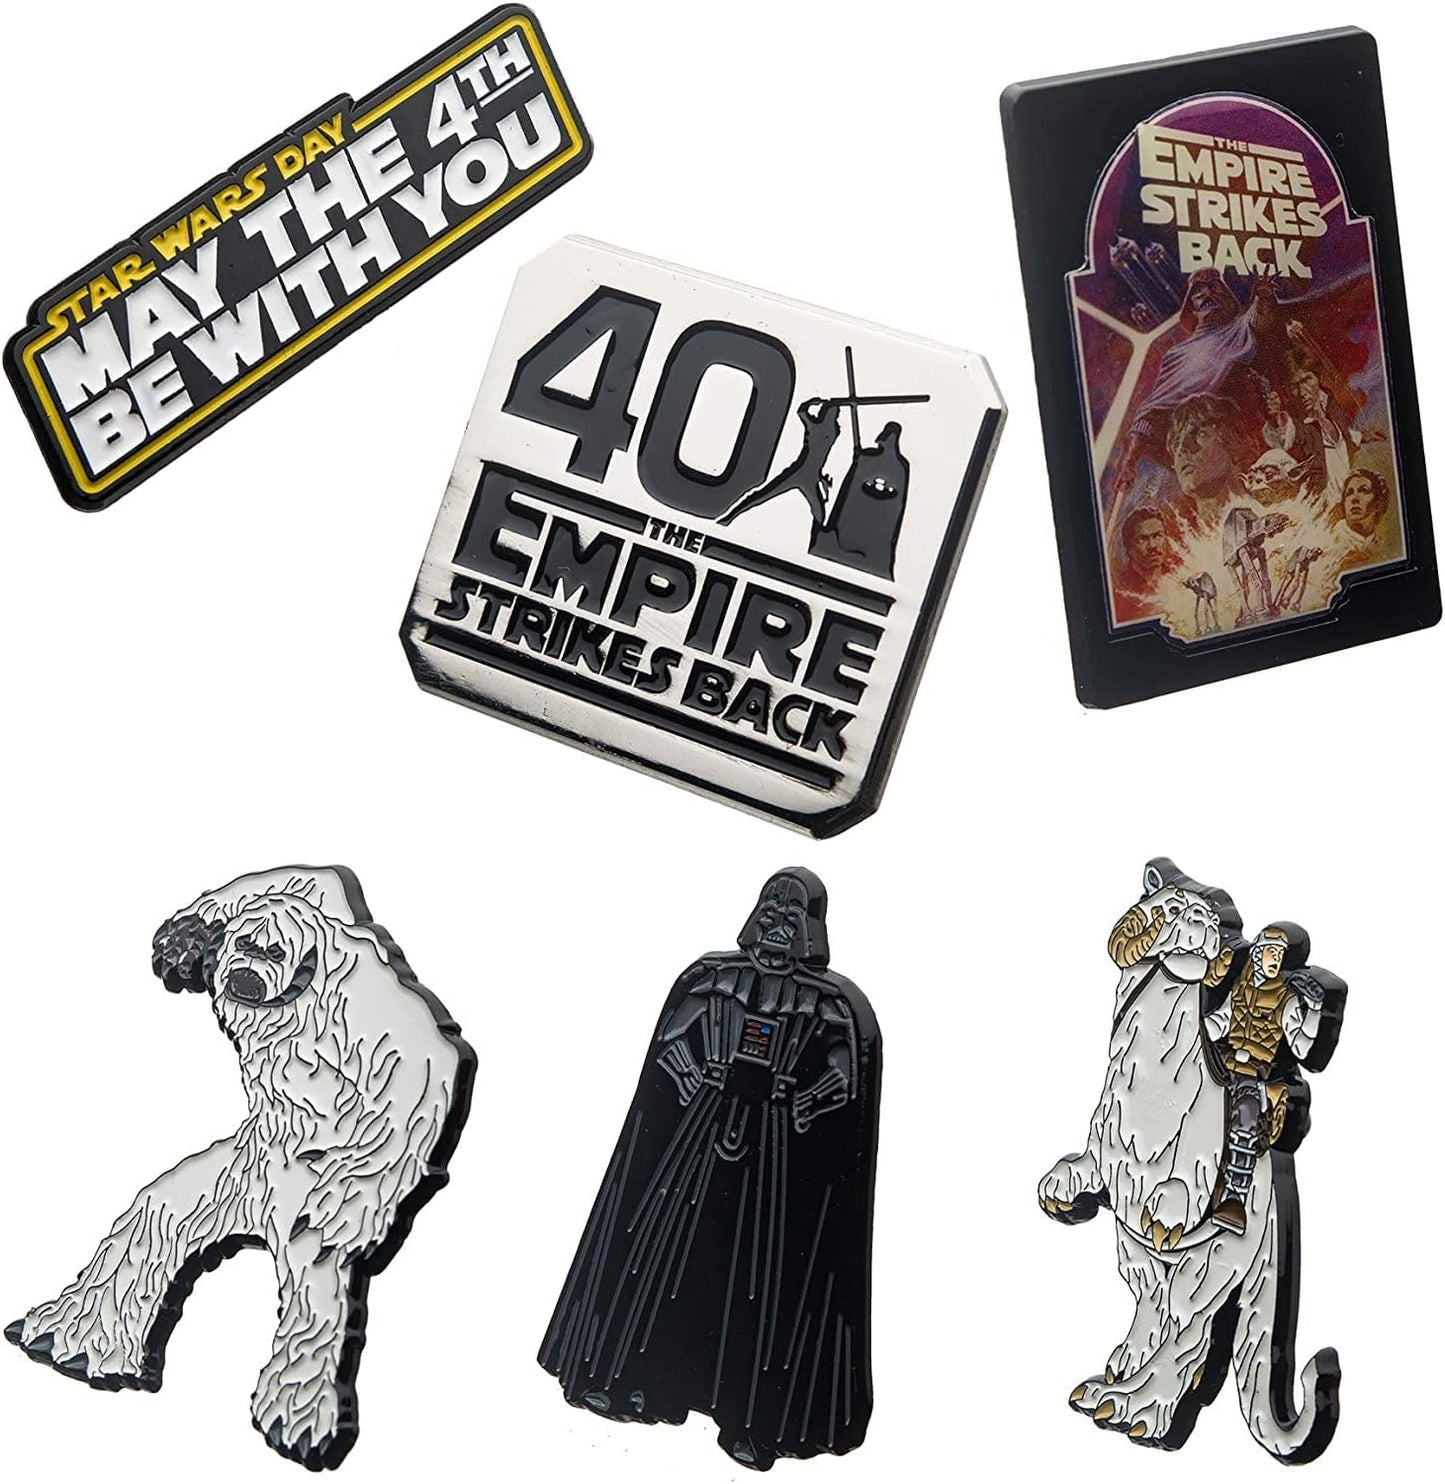 Star Wars: Empire Strikes Back 40th Anniversary Limited Edition